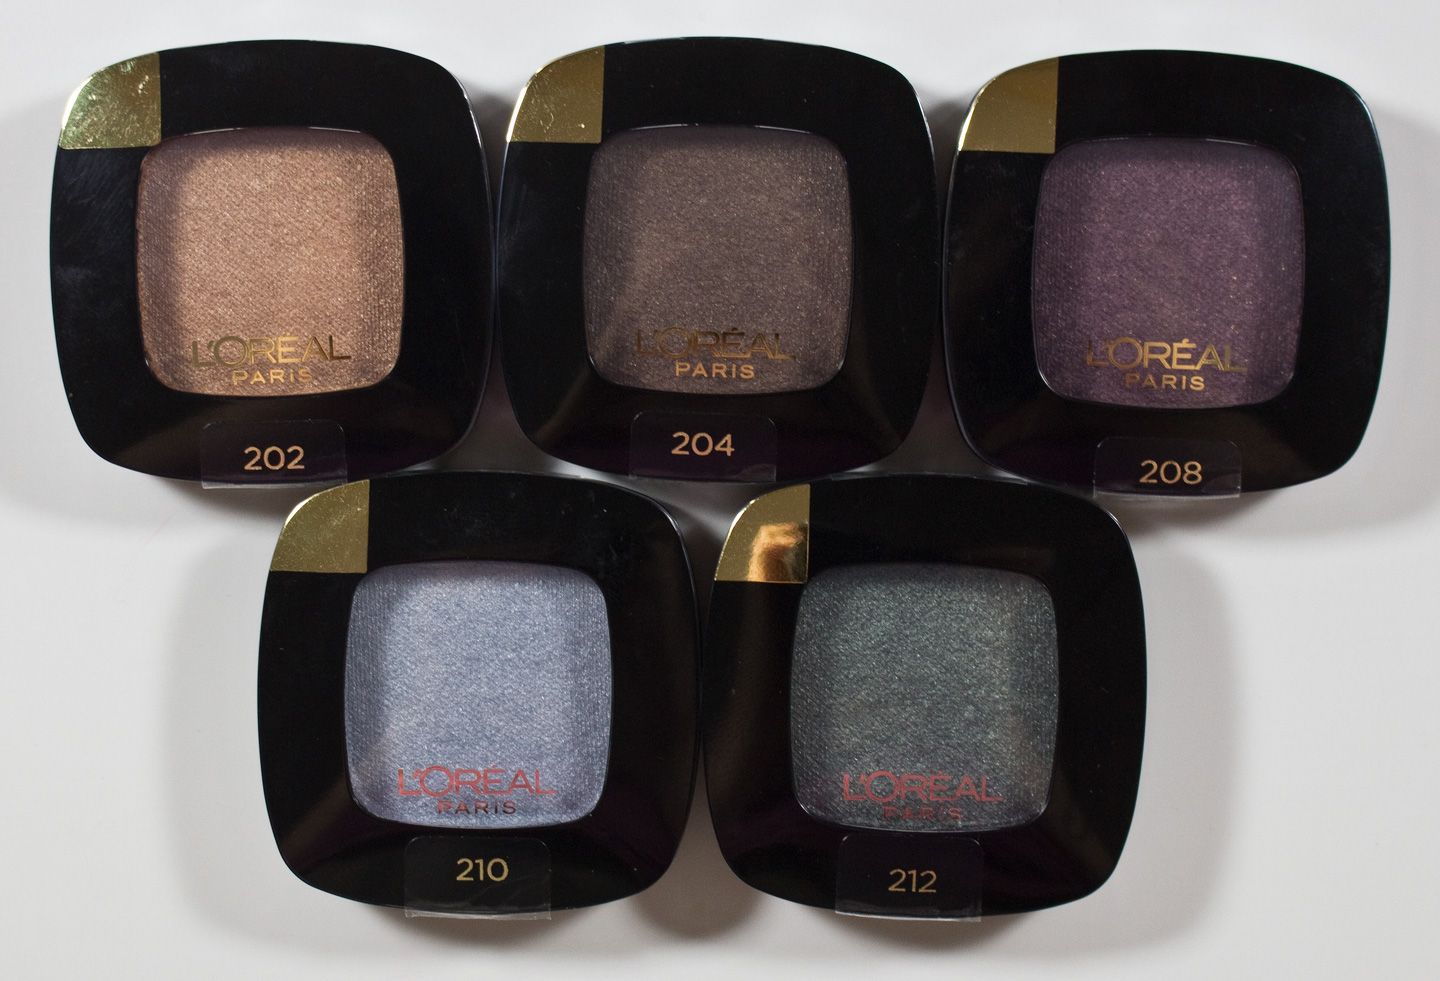 WARPAINT and Unicorns: L'Oreal Colour Riche Mono Eye Shadow Part 3 in